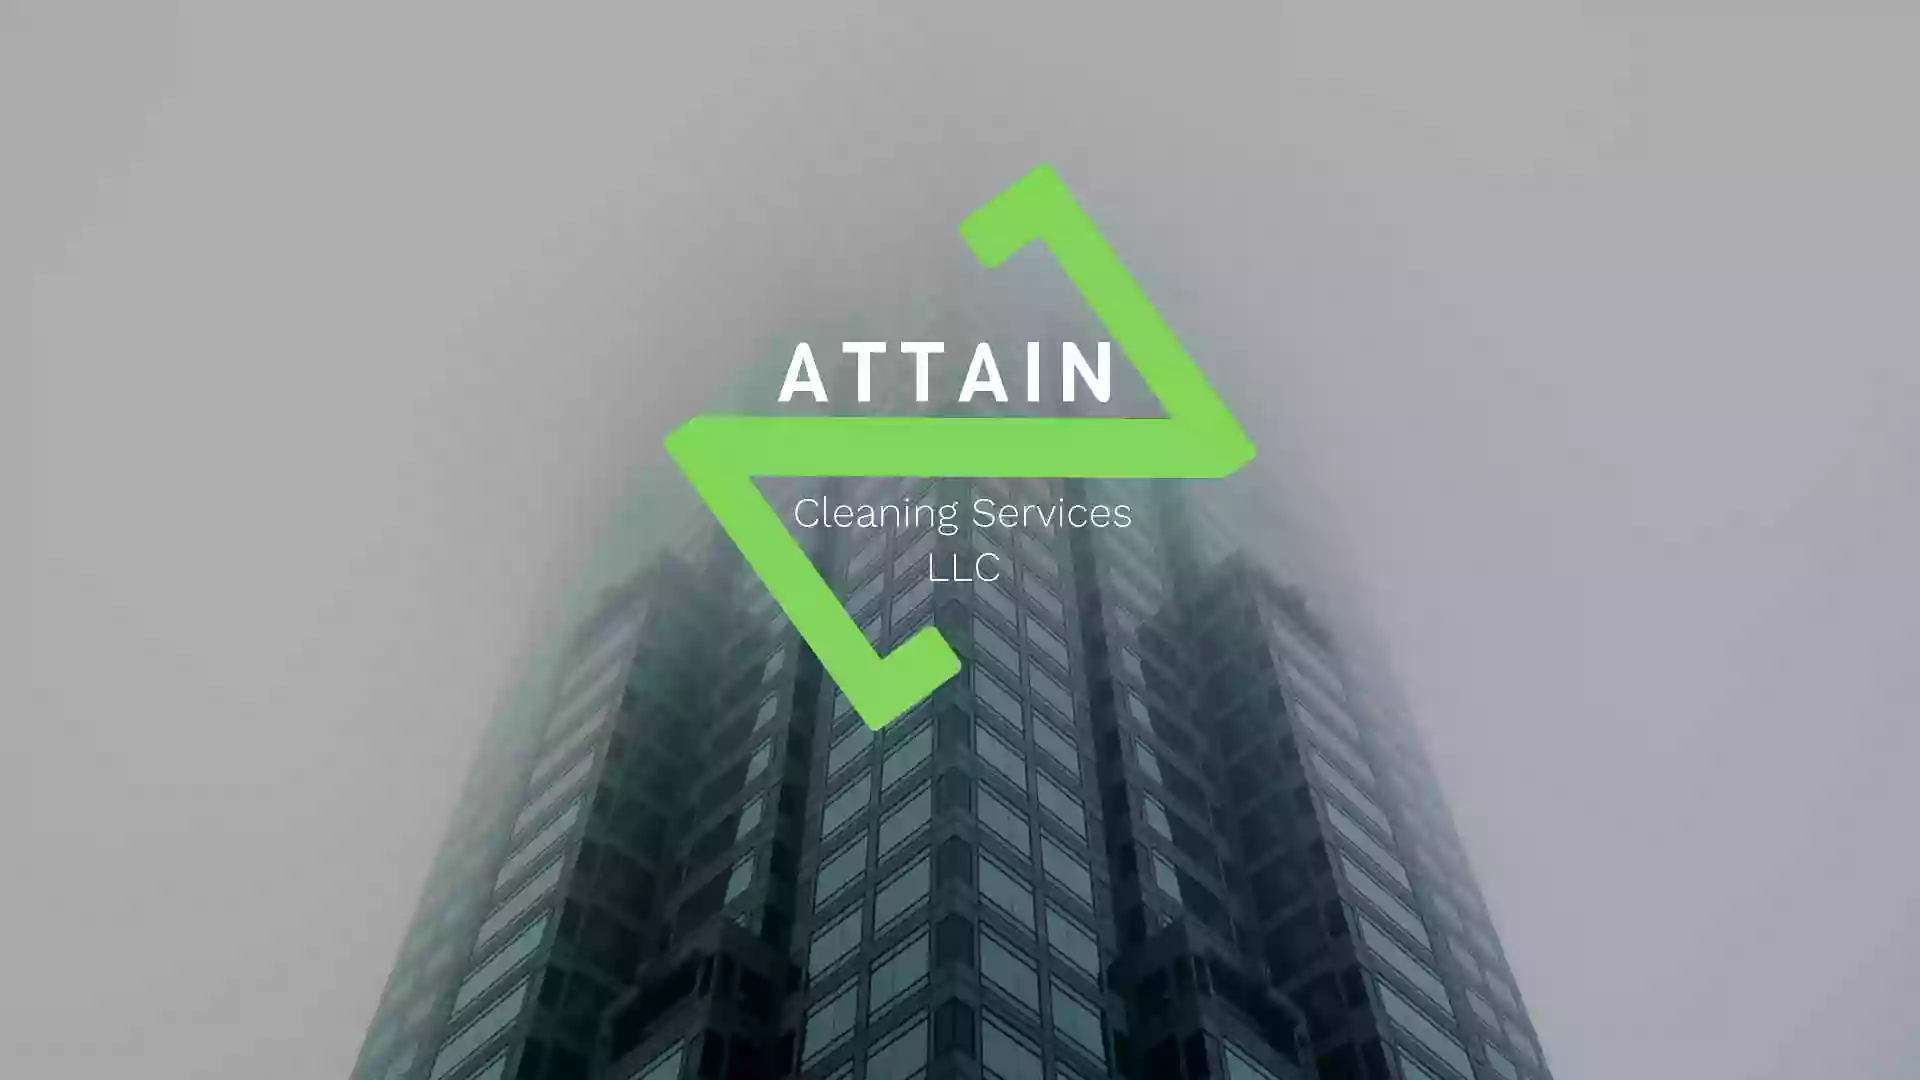 Attain Cleaning Services LLC